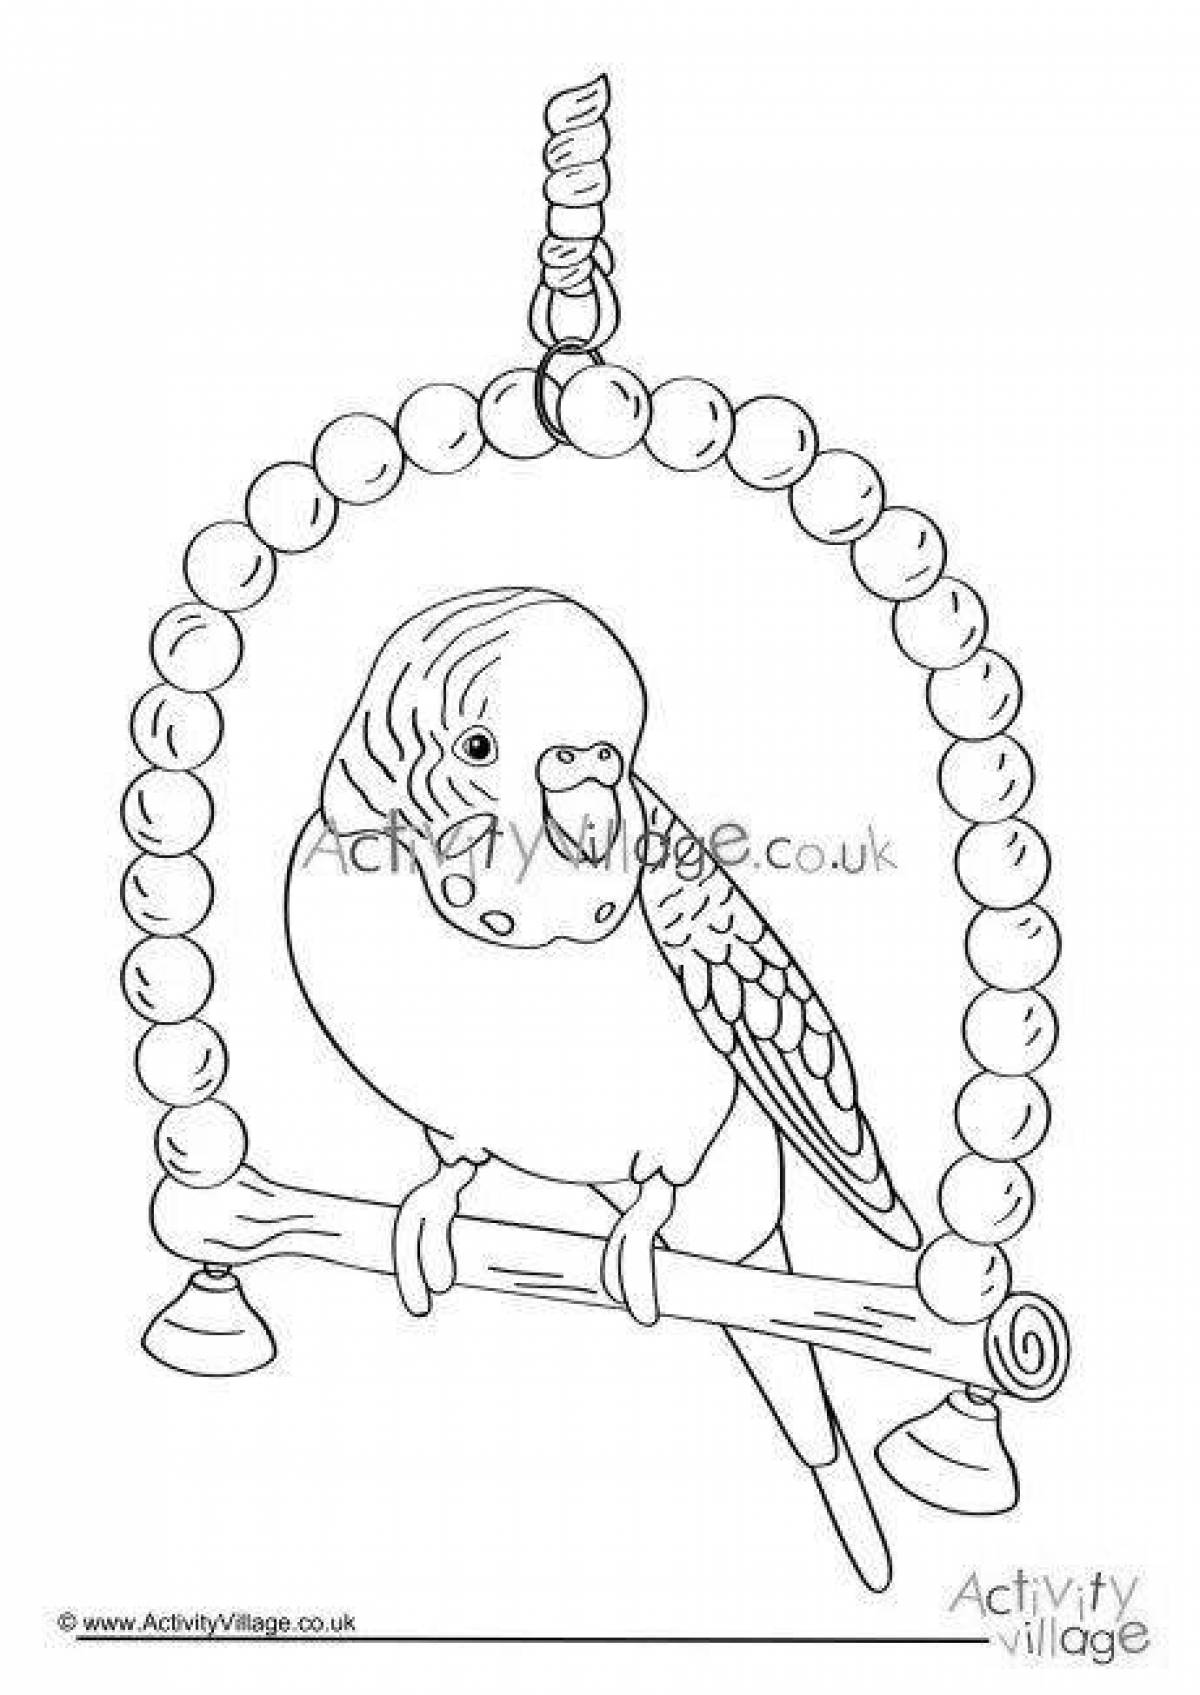 Coloring page with attractive icon